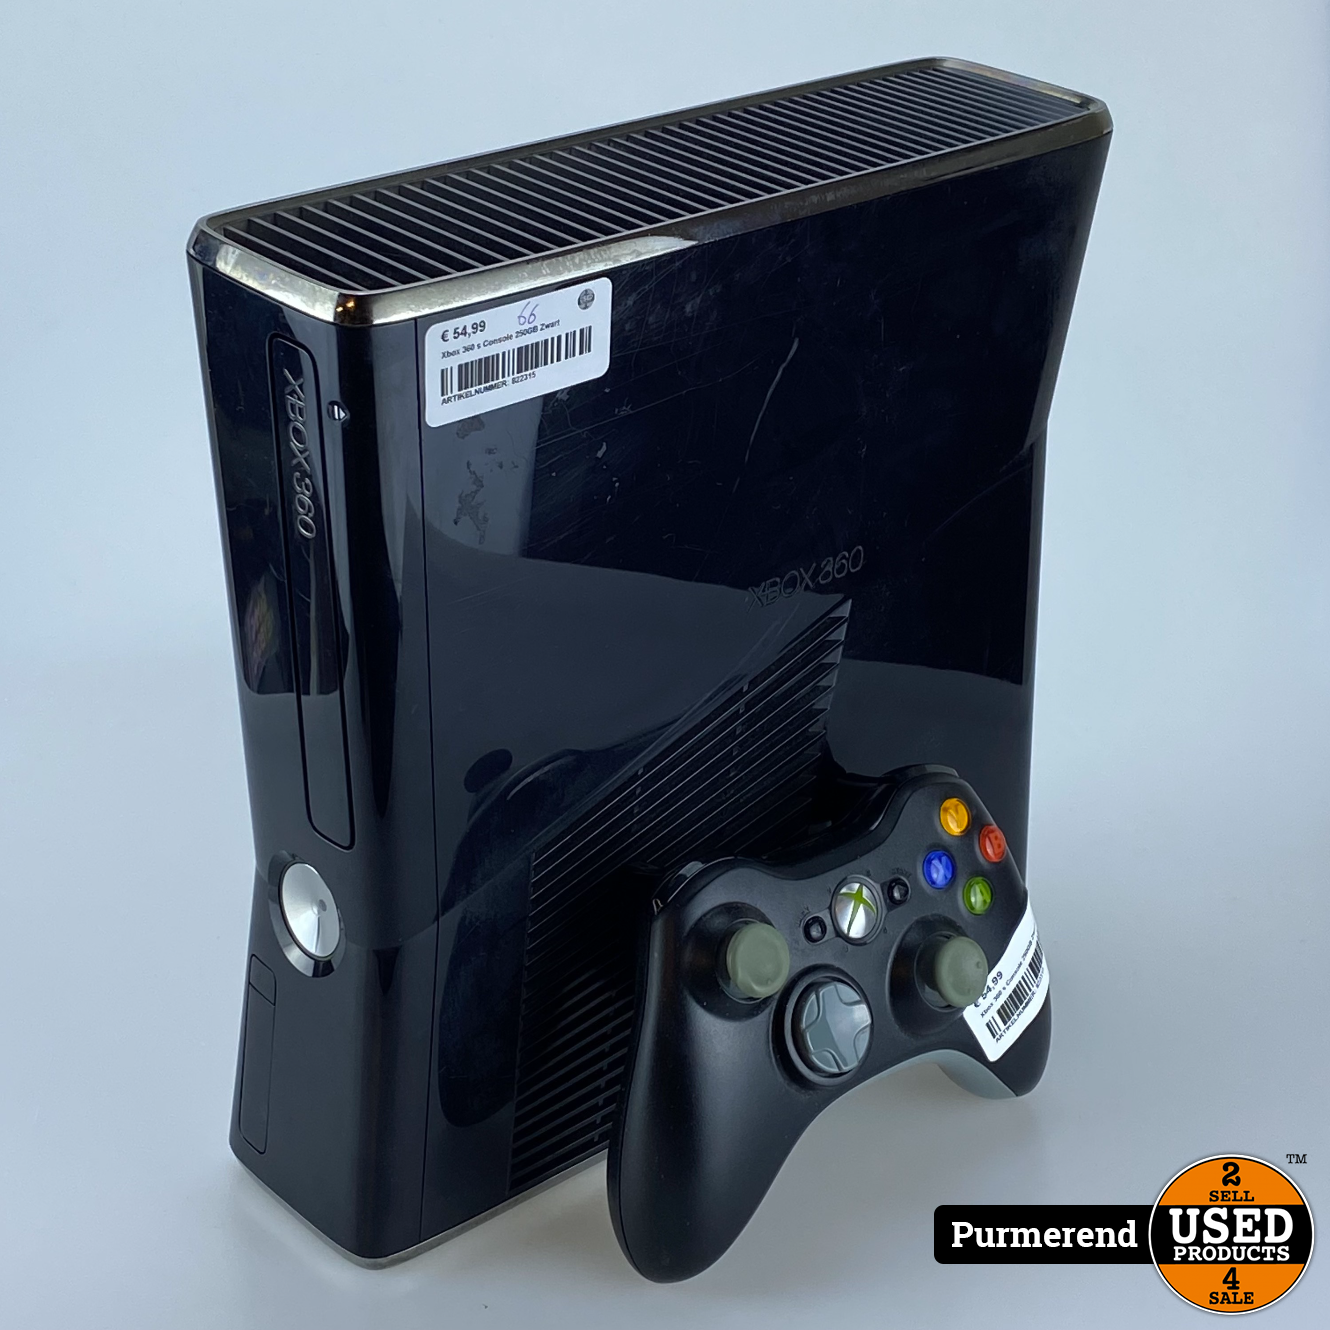 banner Tanzania Profetie Xbox 360 s Console 250GB Zwart - Used Products Purmerend